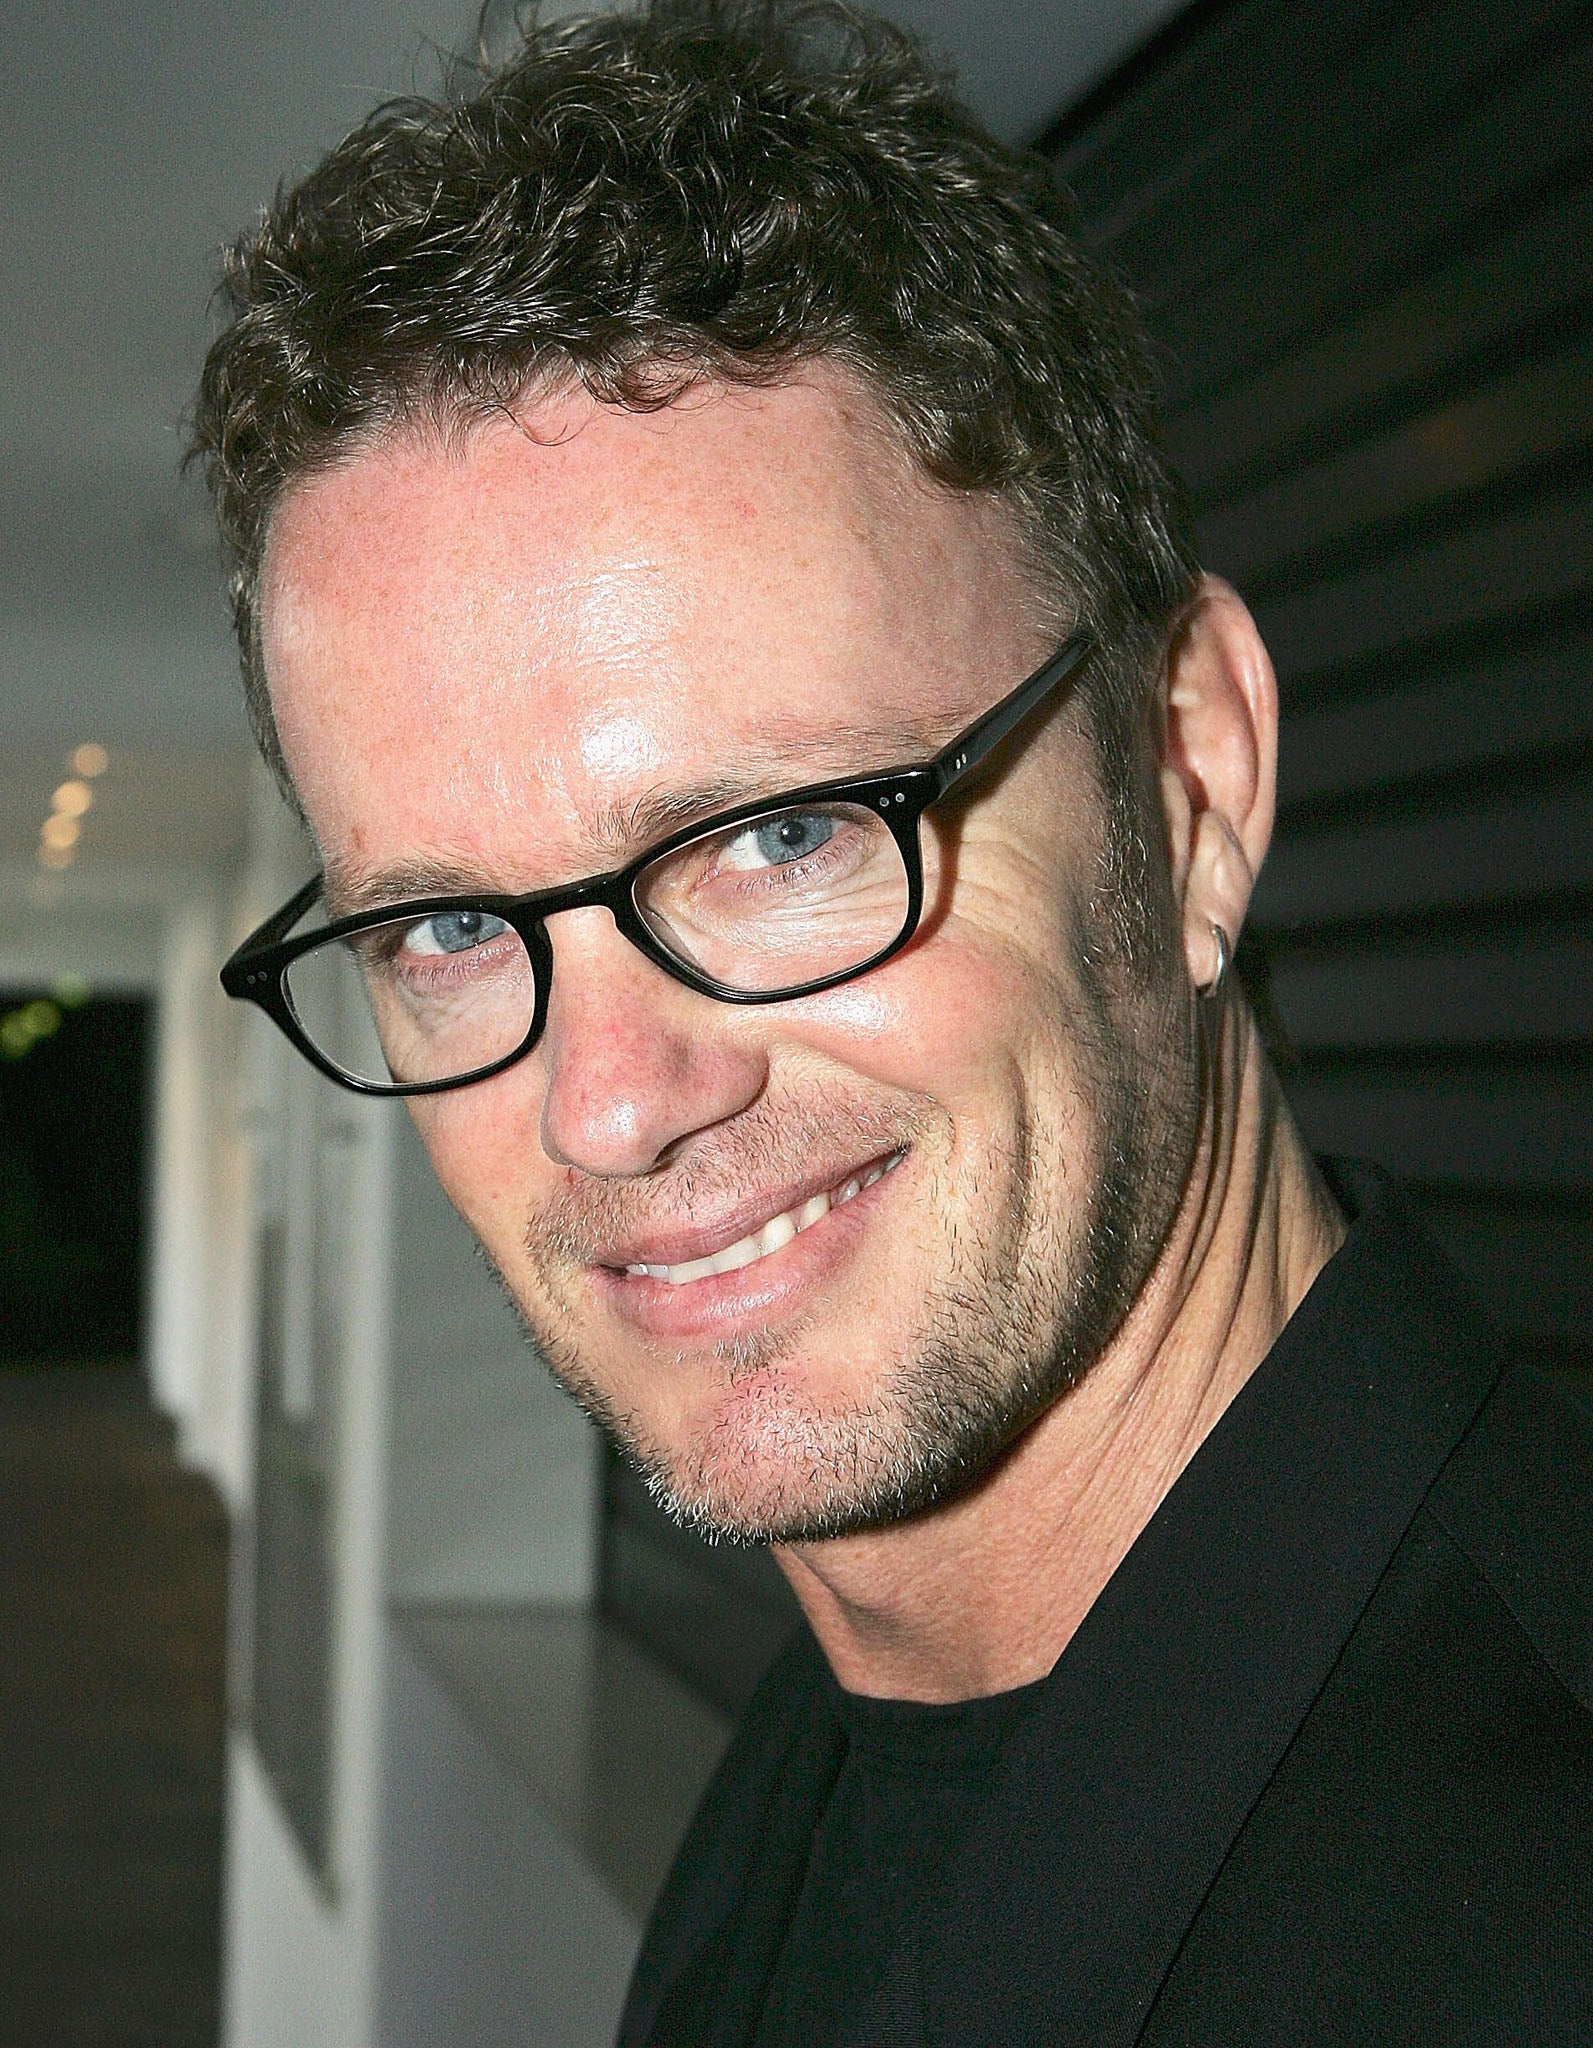 Neighbours star Craig McLachlan is to return to the BBC in The Doctor Blake Mysteries which have already been a hit in his native Australia.